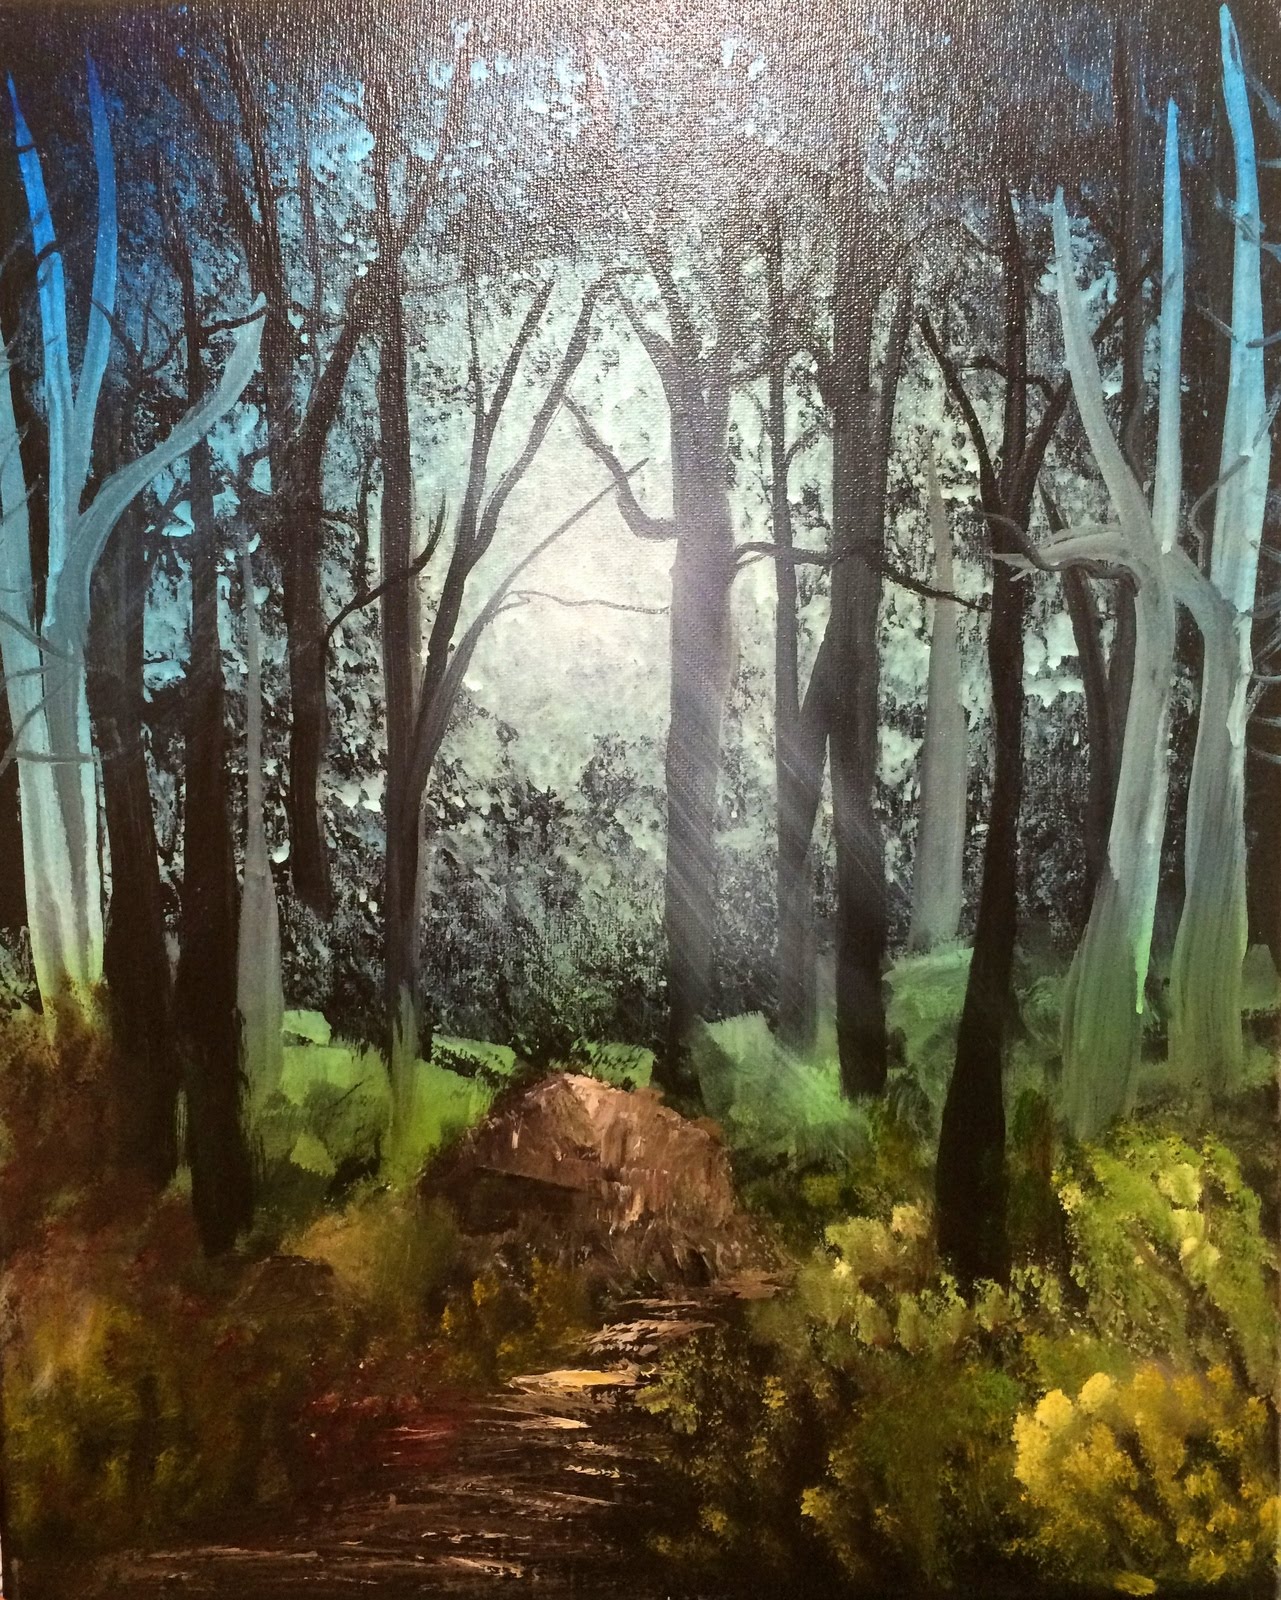 How to Paint a Forest Landscape - YouTube